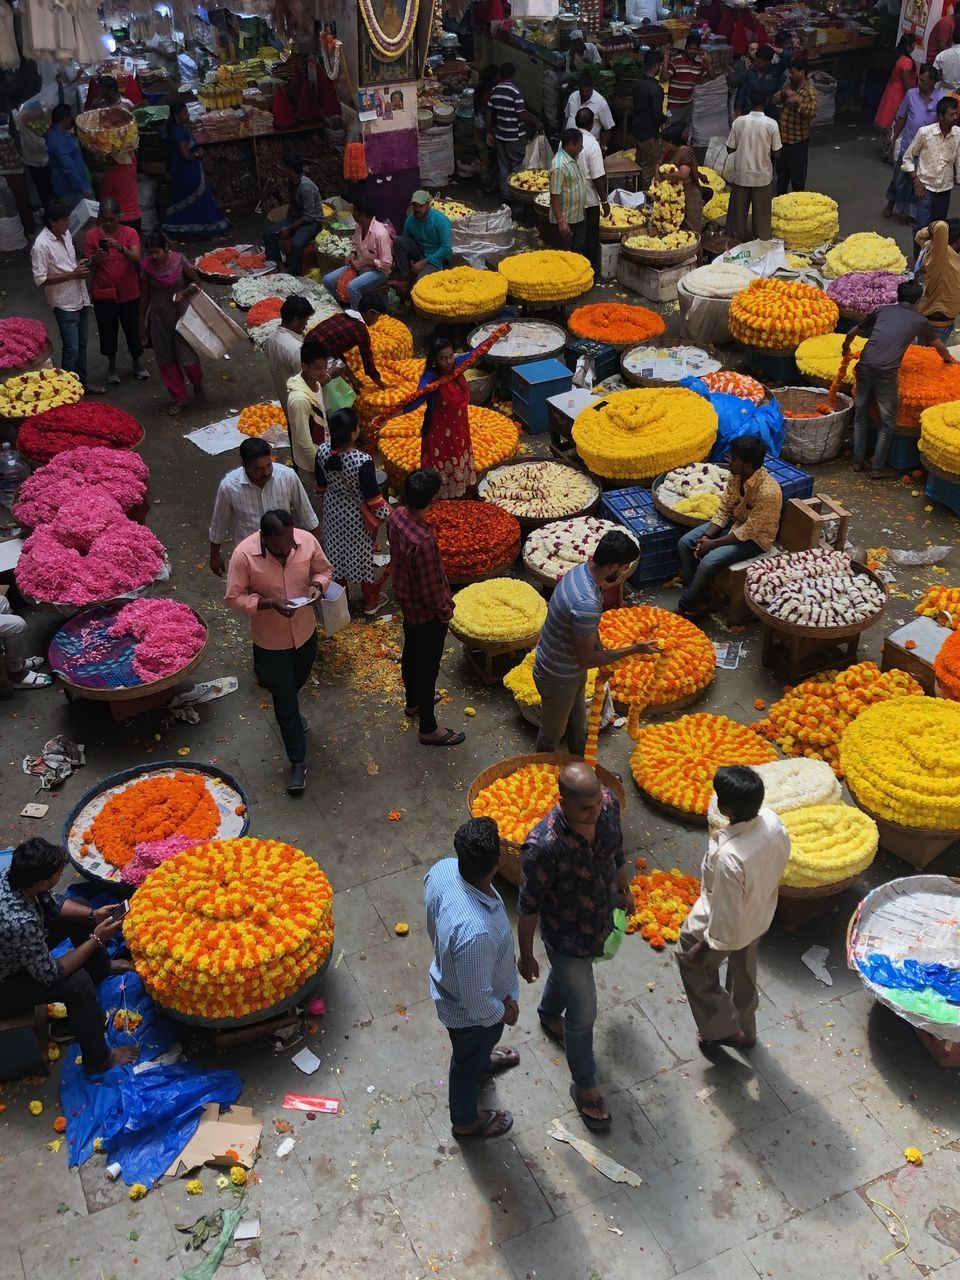 HIGH ANGLE VIEW OF PEOPLE AT MARKET STALL